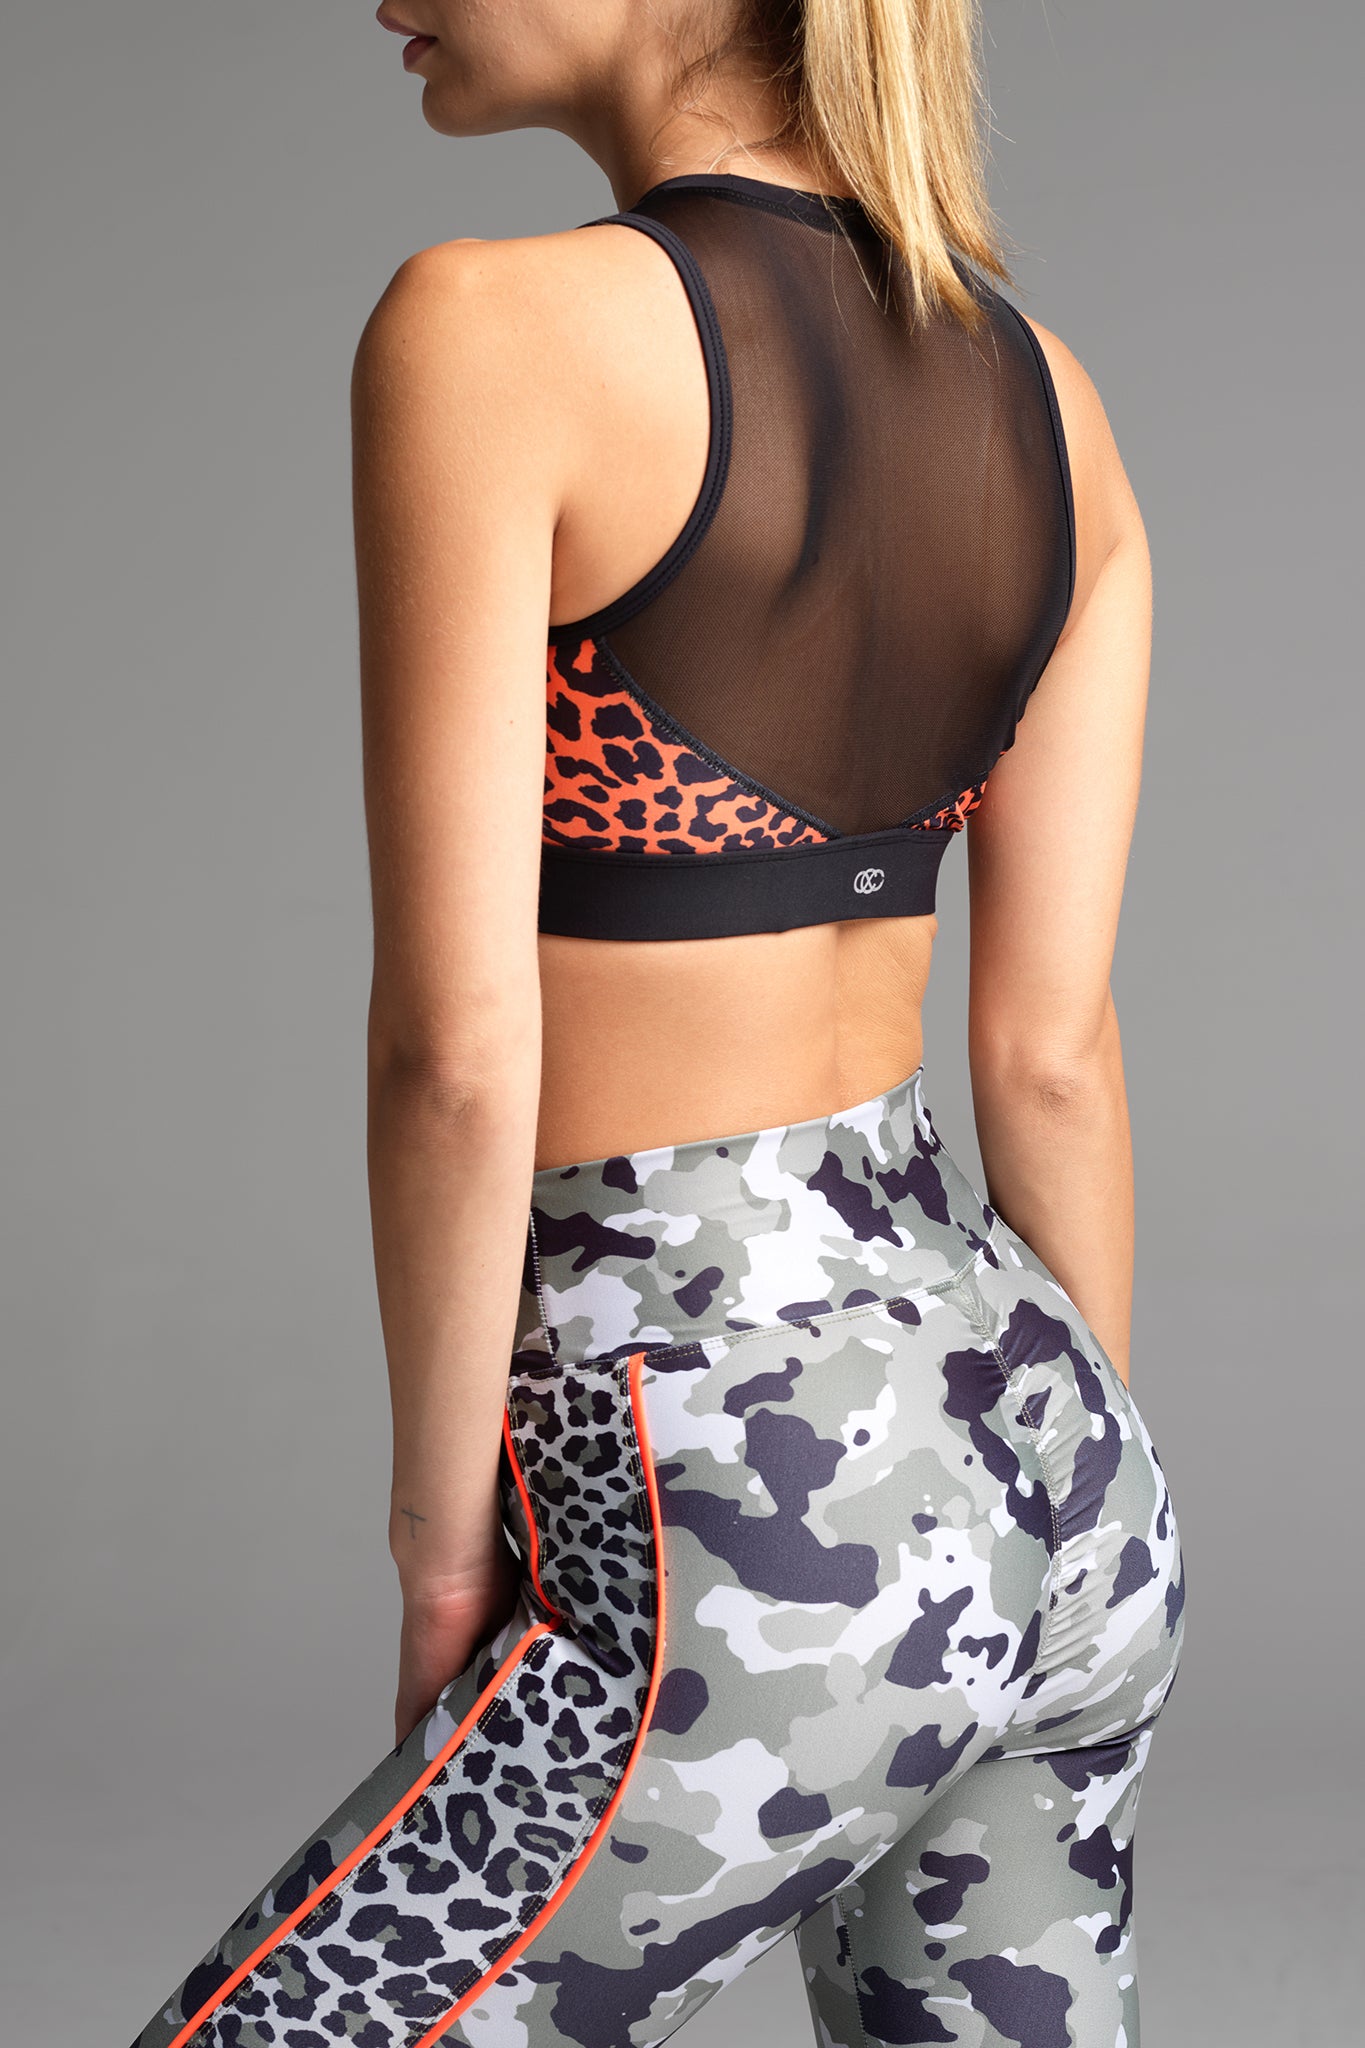 For extra va-voom, the Charlie 7/8 Length Legging in Camo print has rouching at the bum to give extra shape.